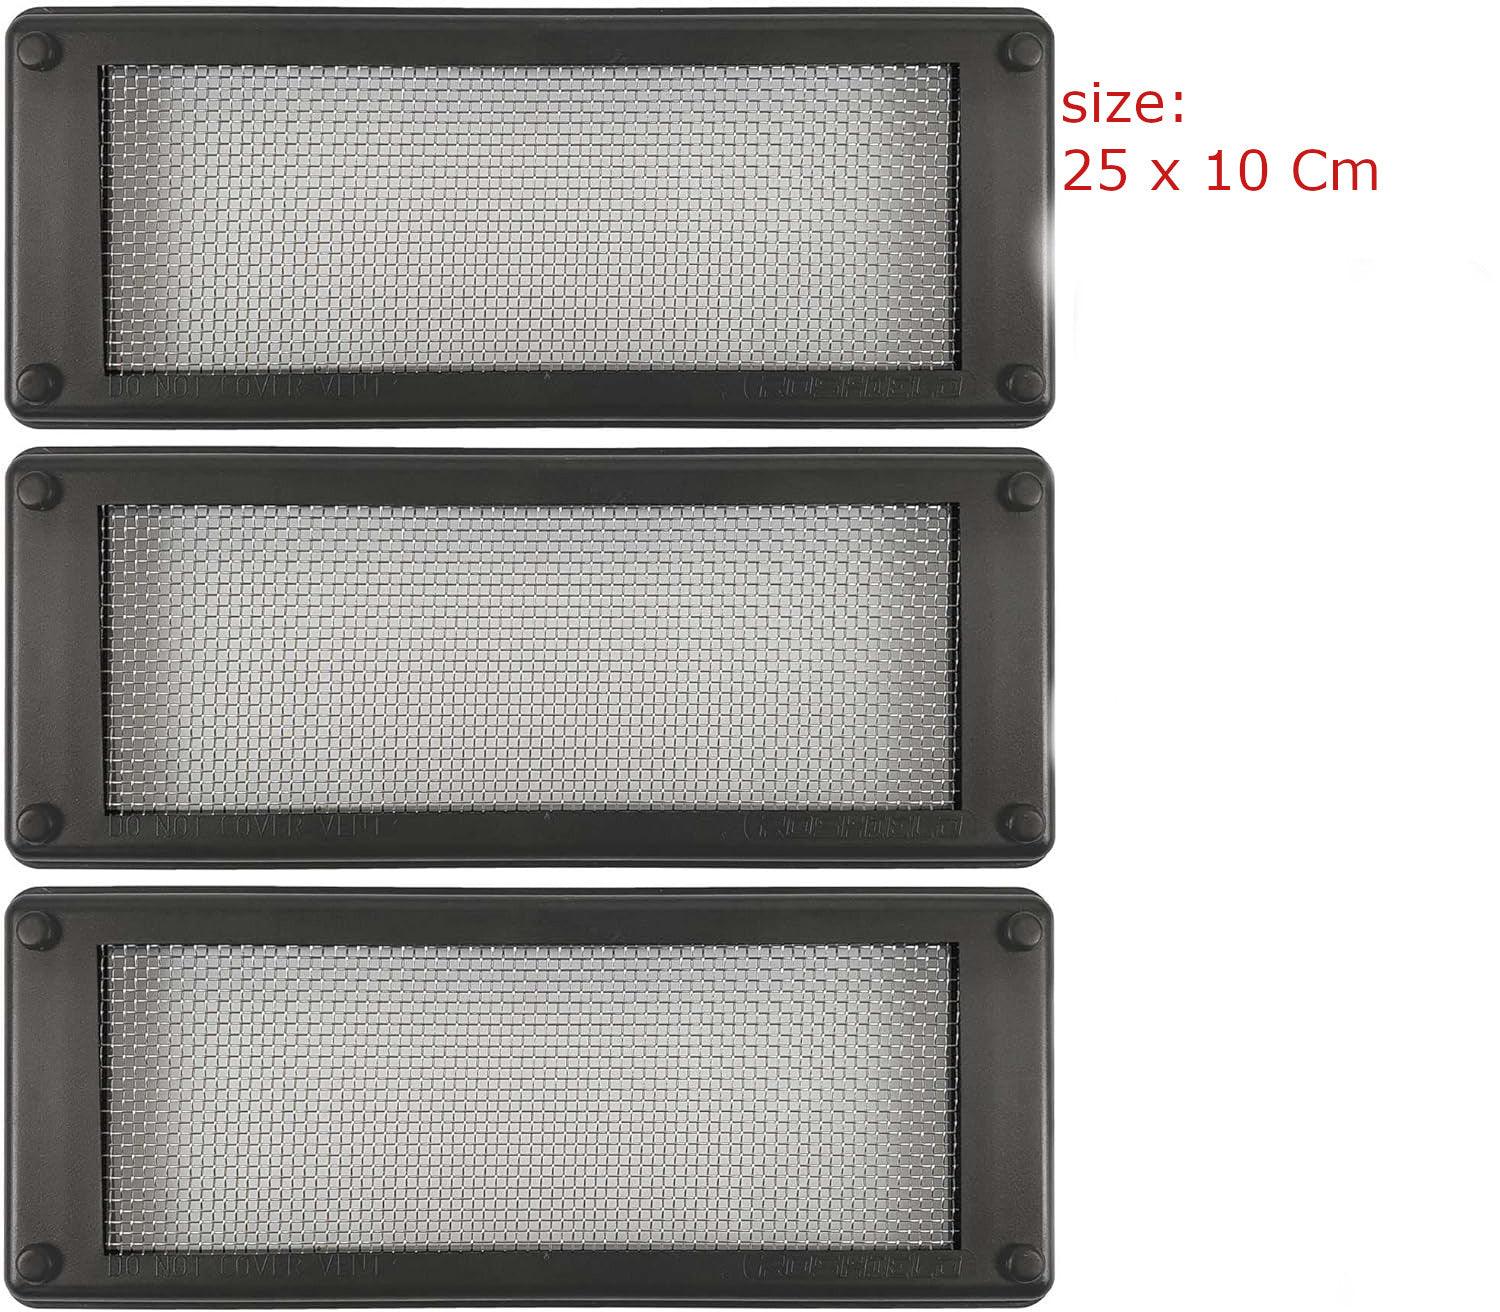 3 pcs Pest Proofing Air Brick Mesh Vent Cover For Mouse Insect 25x10cm - Massive Discounts